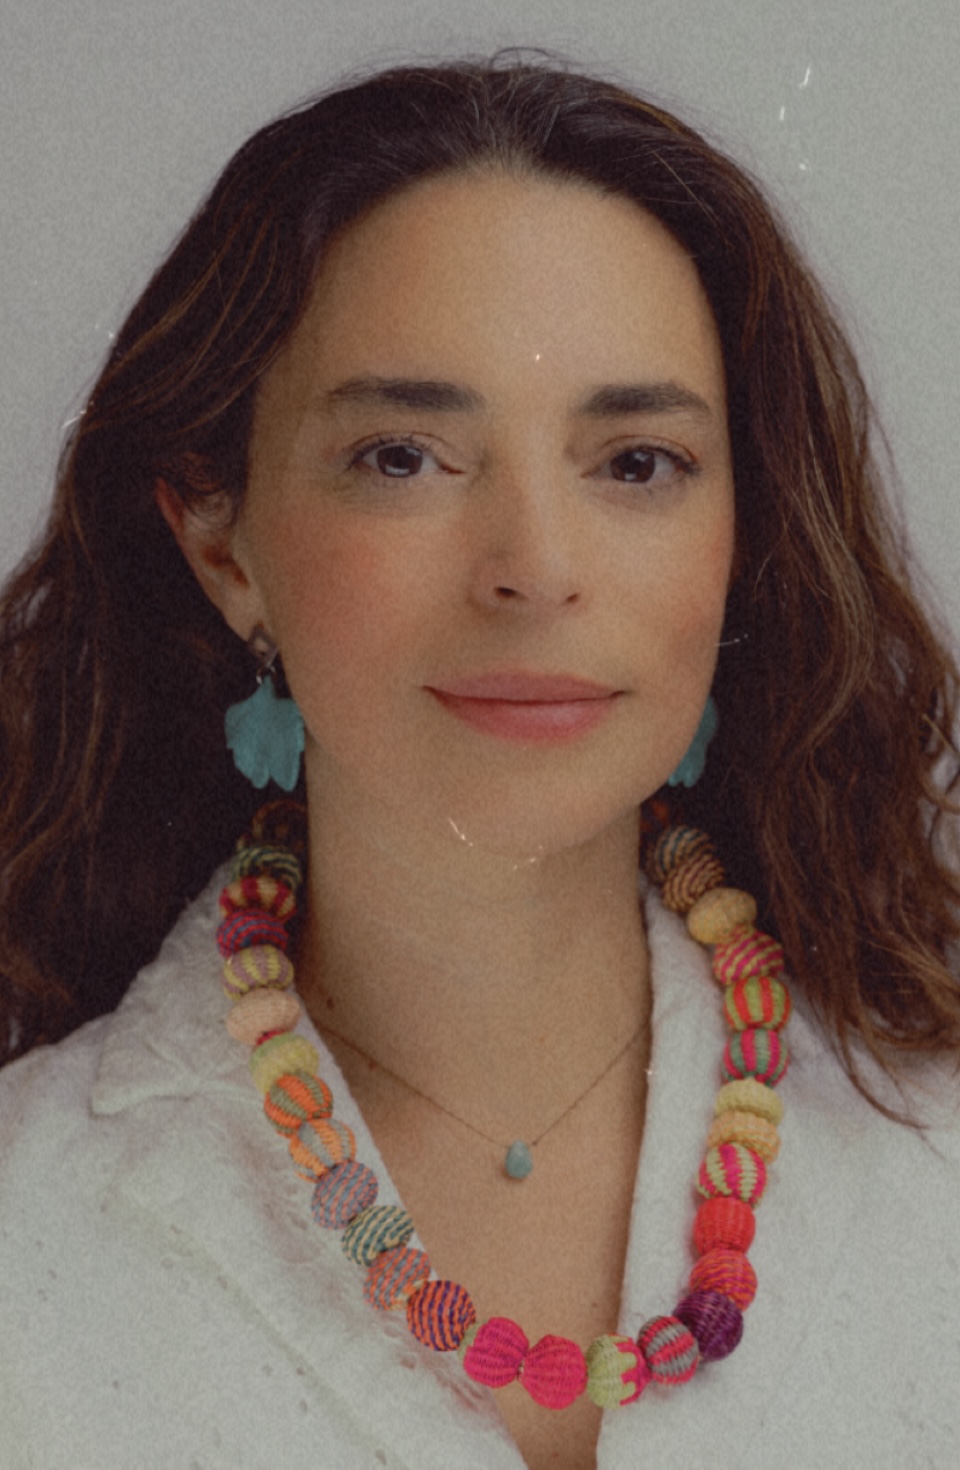 Uri Ramos headshot - fair-skinned woman with long brown hair wearing white shirt and colorfol necklace